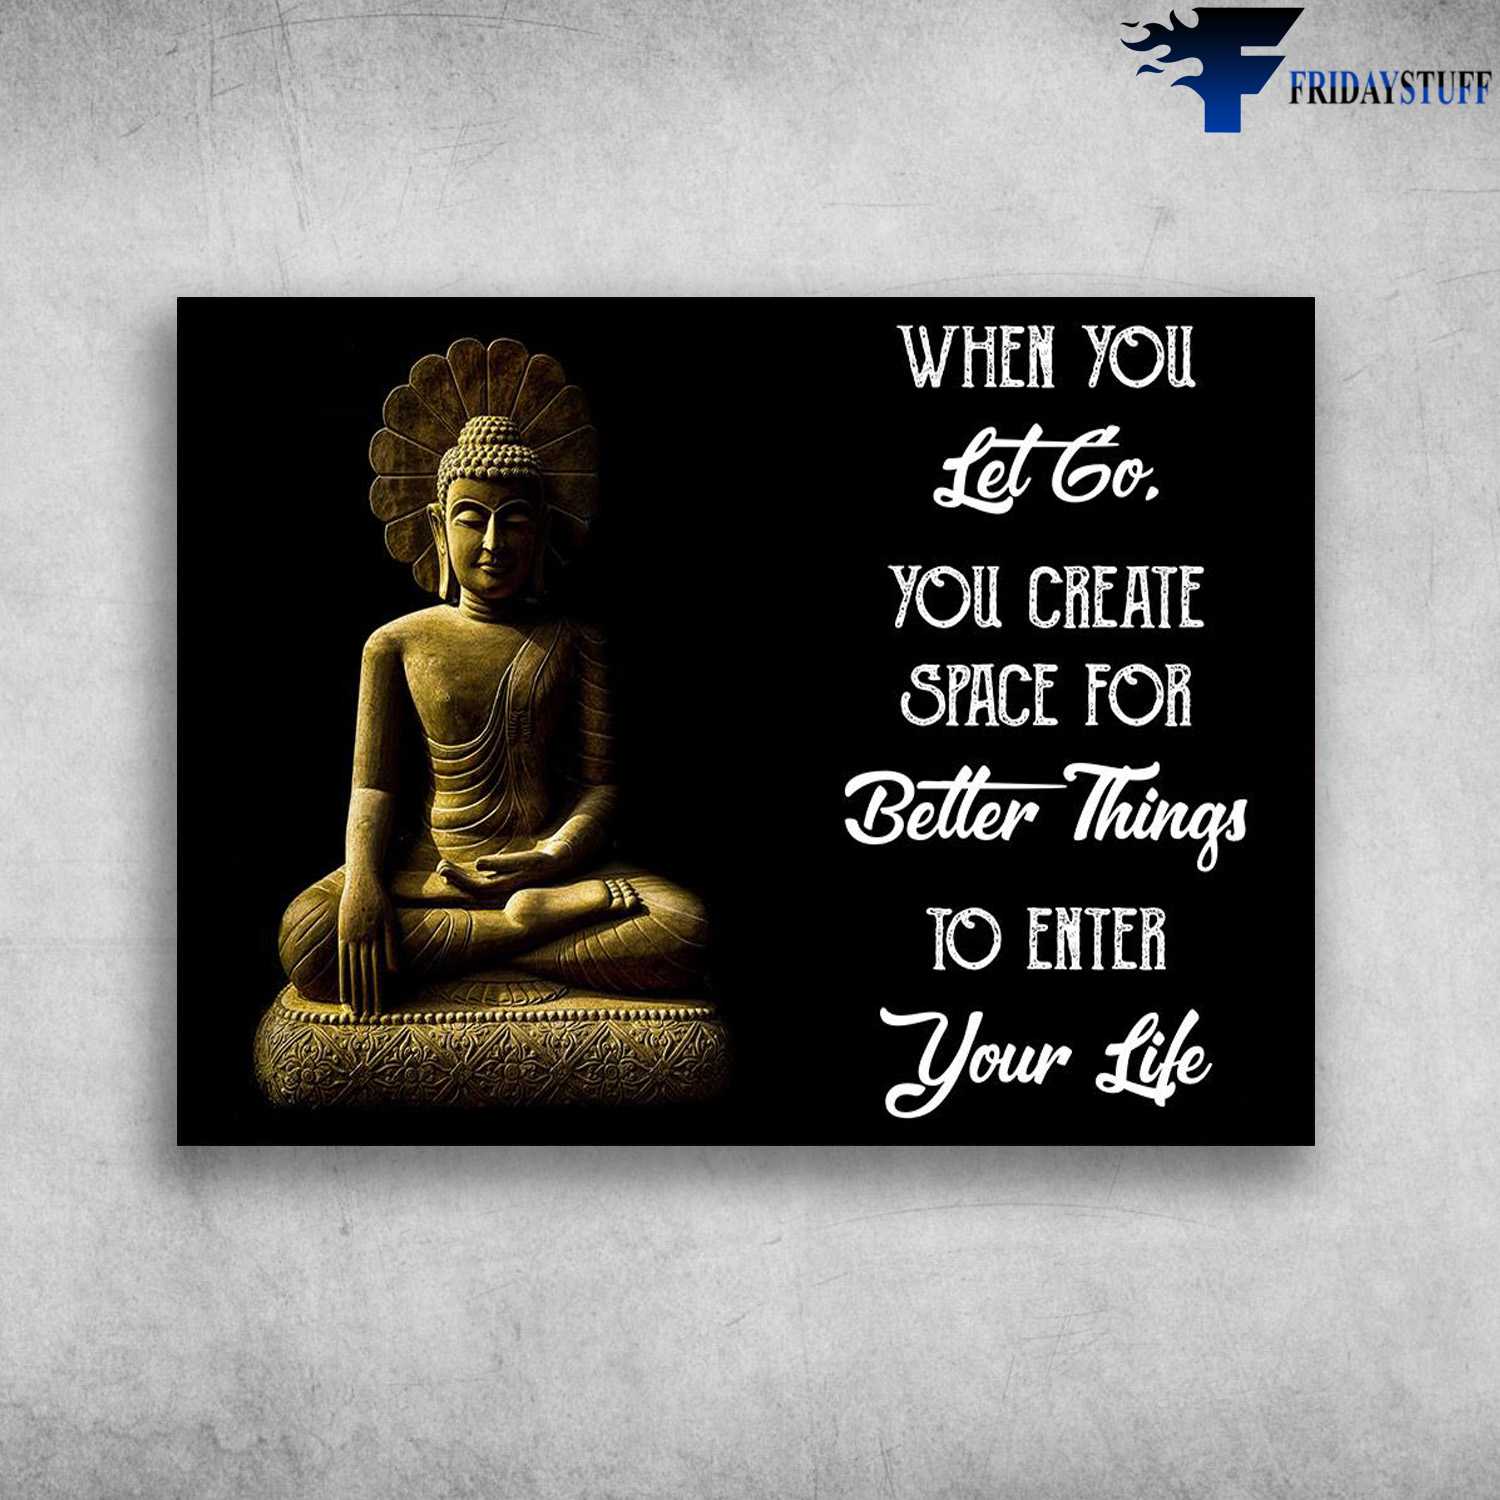 Gautama Buddha - When You Let Go, You Create Space For Better Things, To Enter Your Life